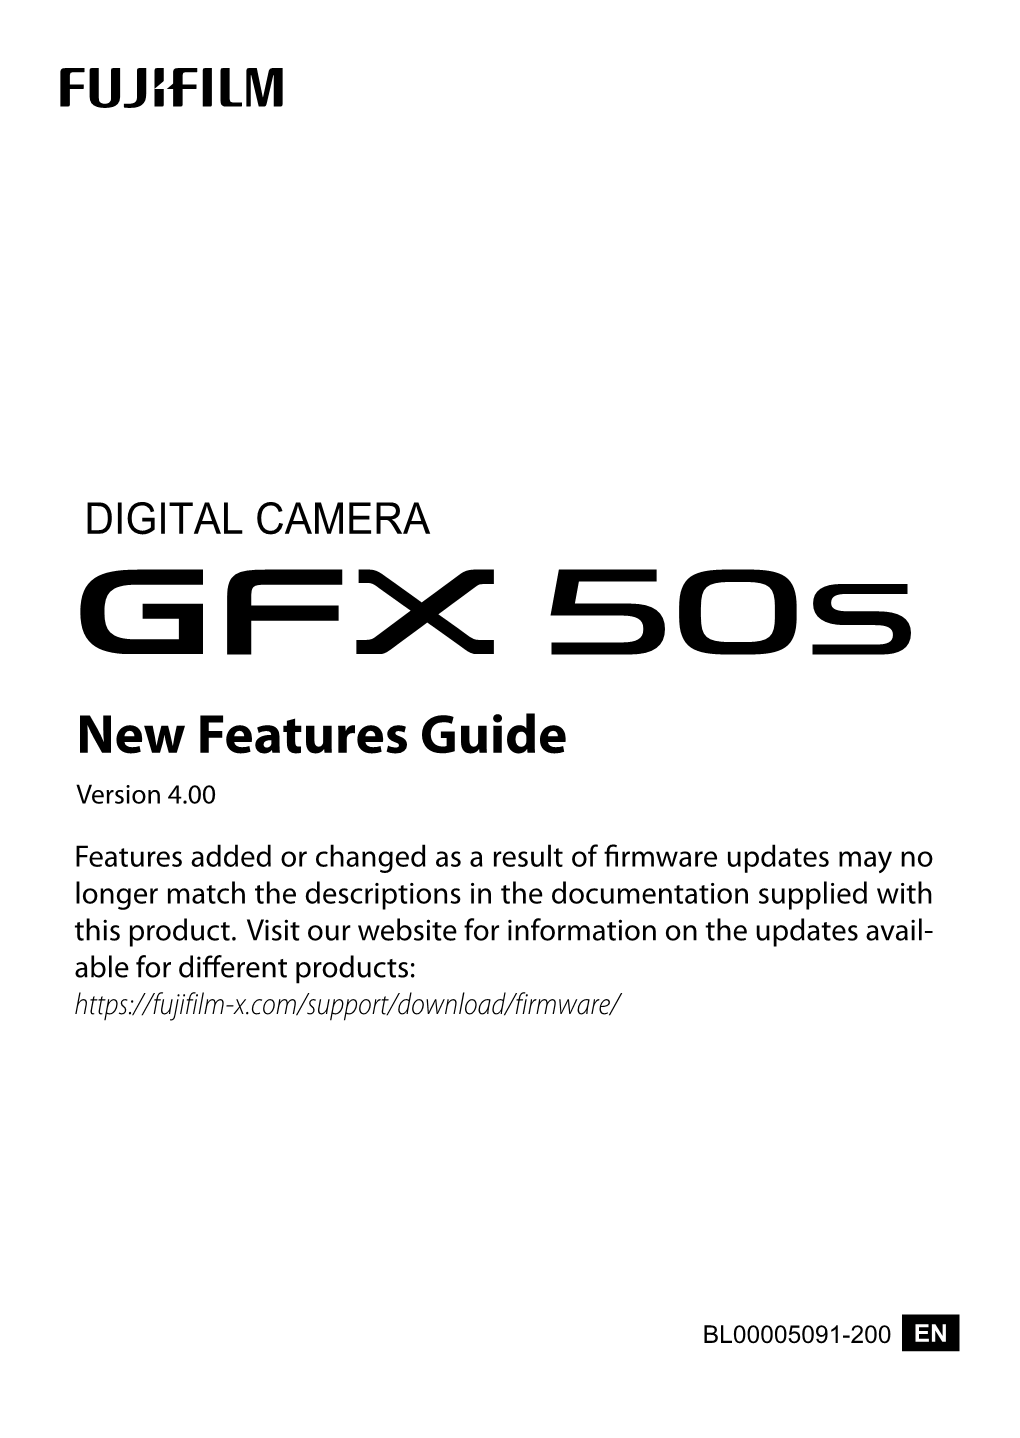 New Features Guide Version 4.00